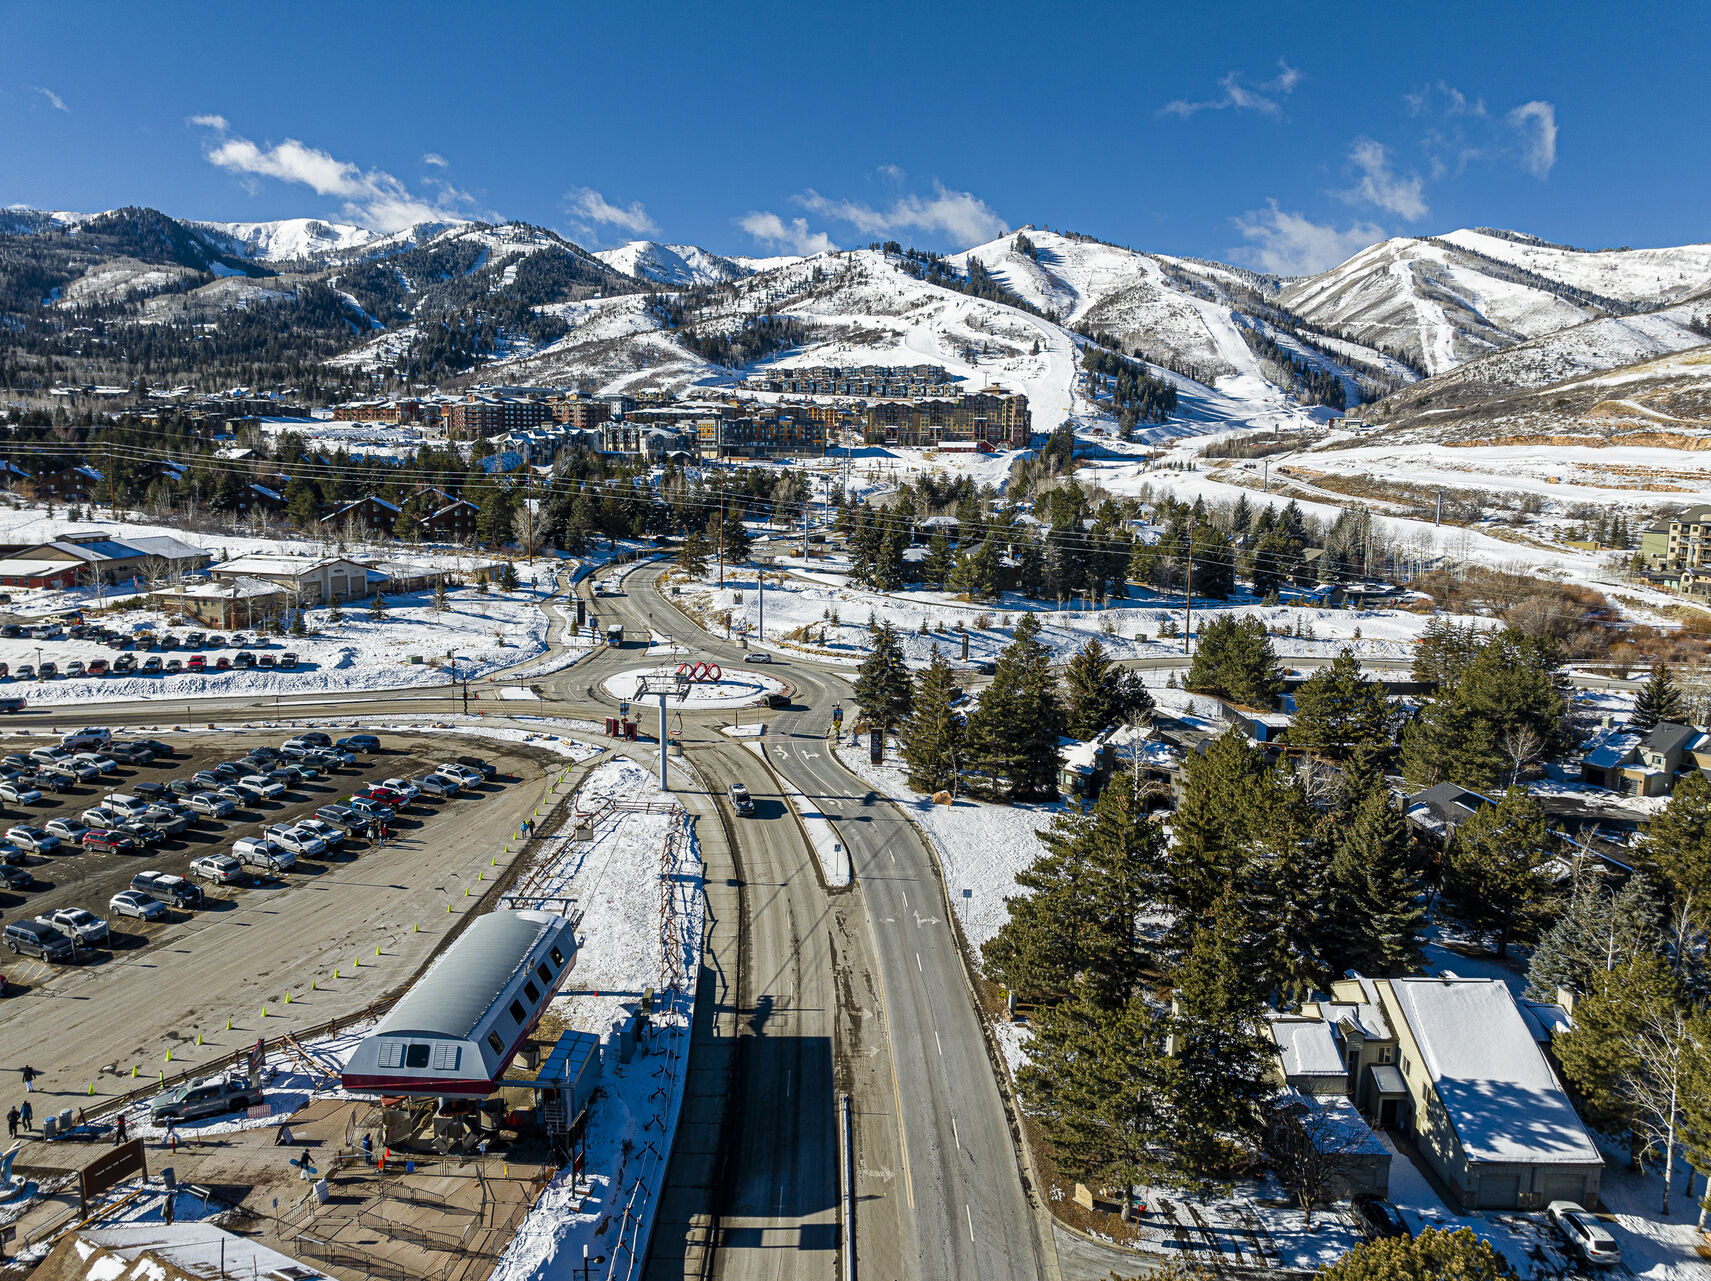 Walk to the Park City Canyons Village Cabriolet and Canyons Transit Center for free bus